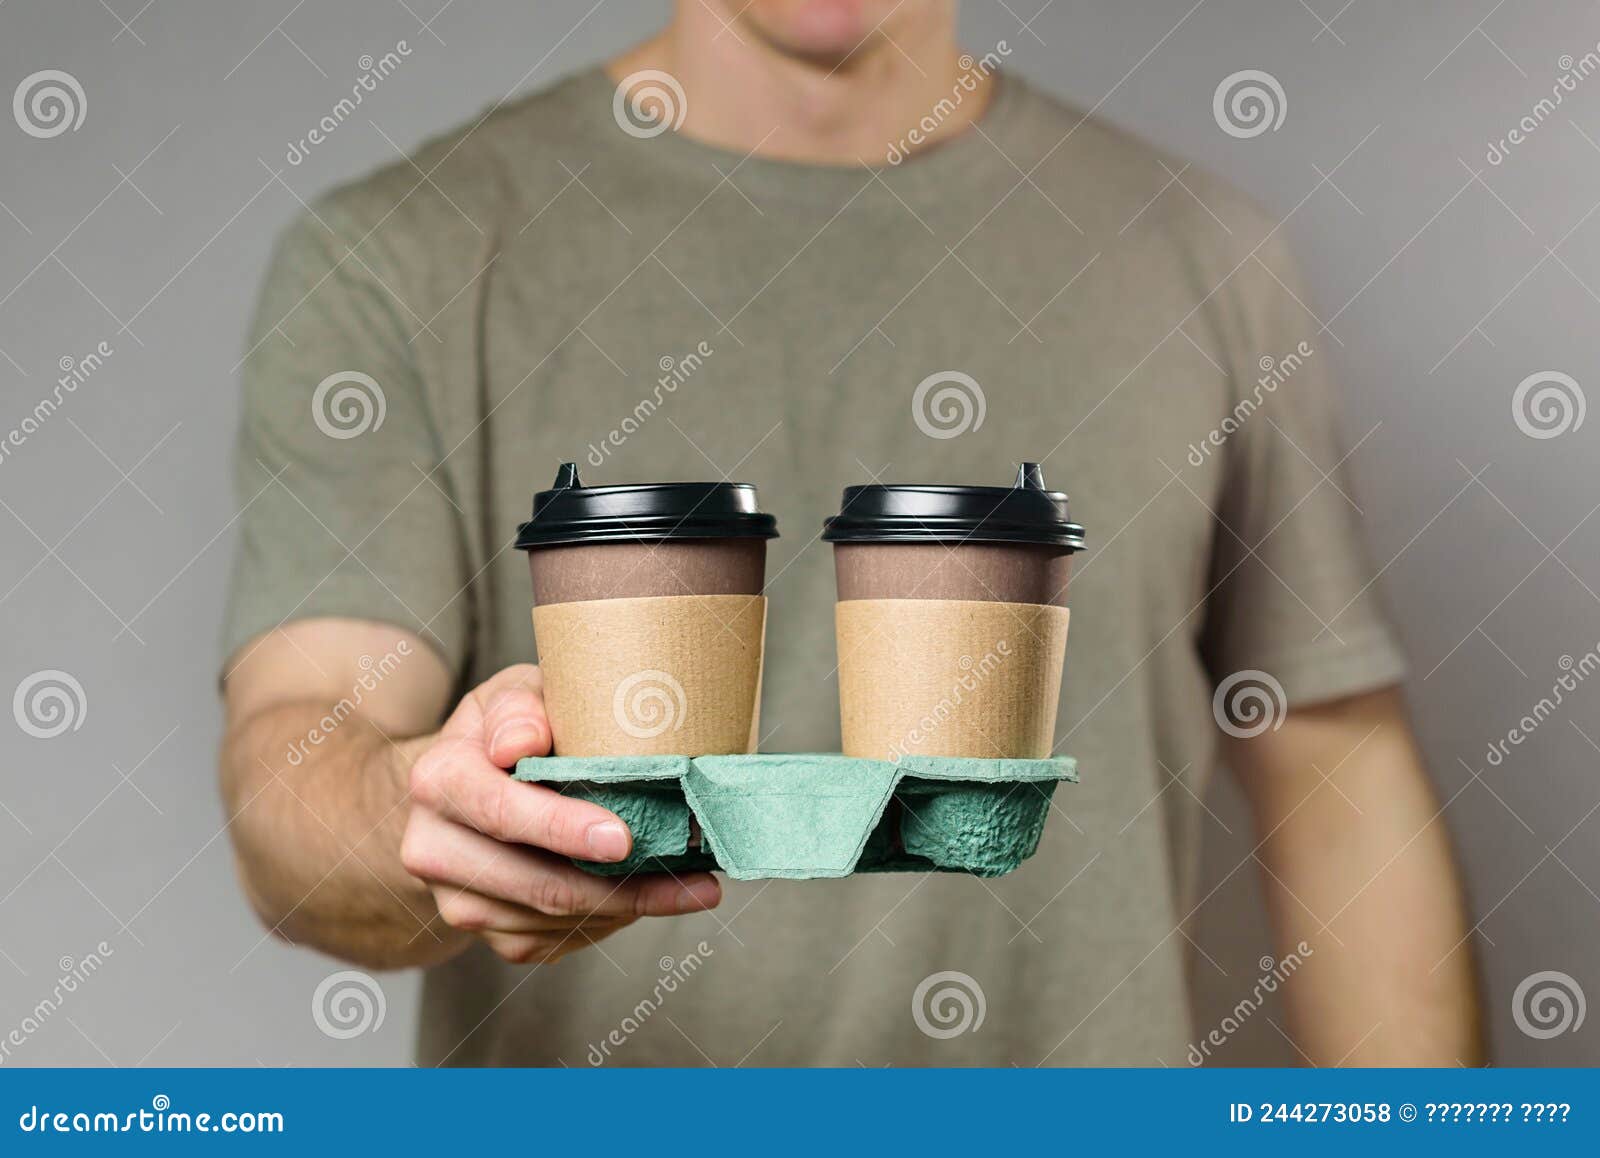 A Man Holds a Cardboard Cup Holder with Two Disposable Coffee Cups